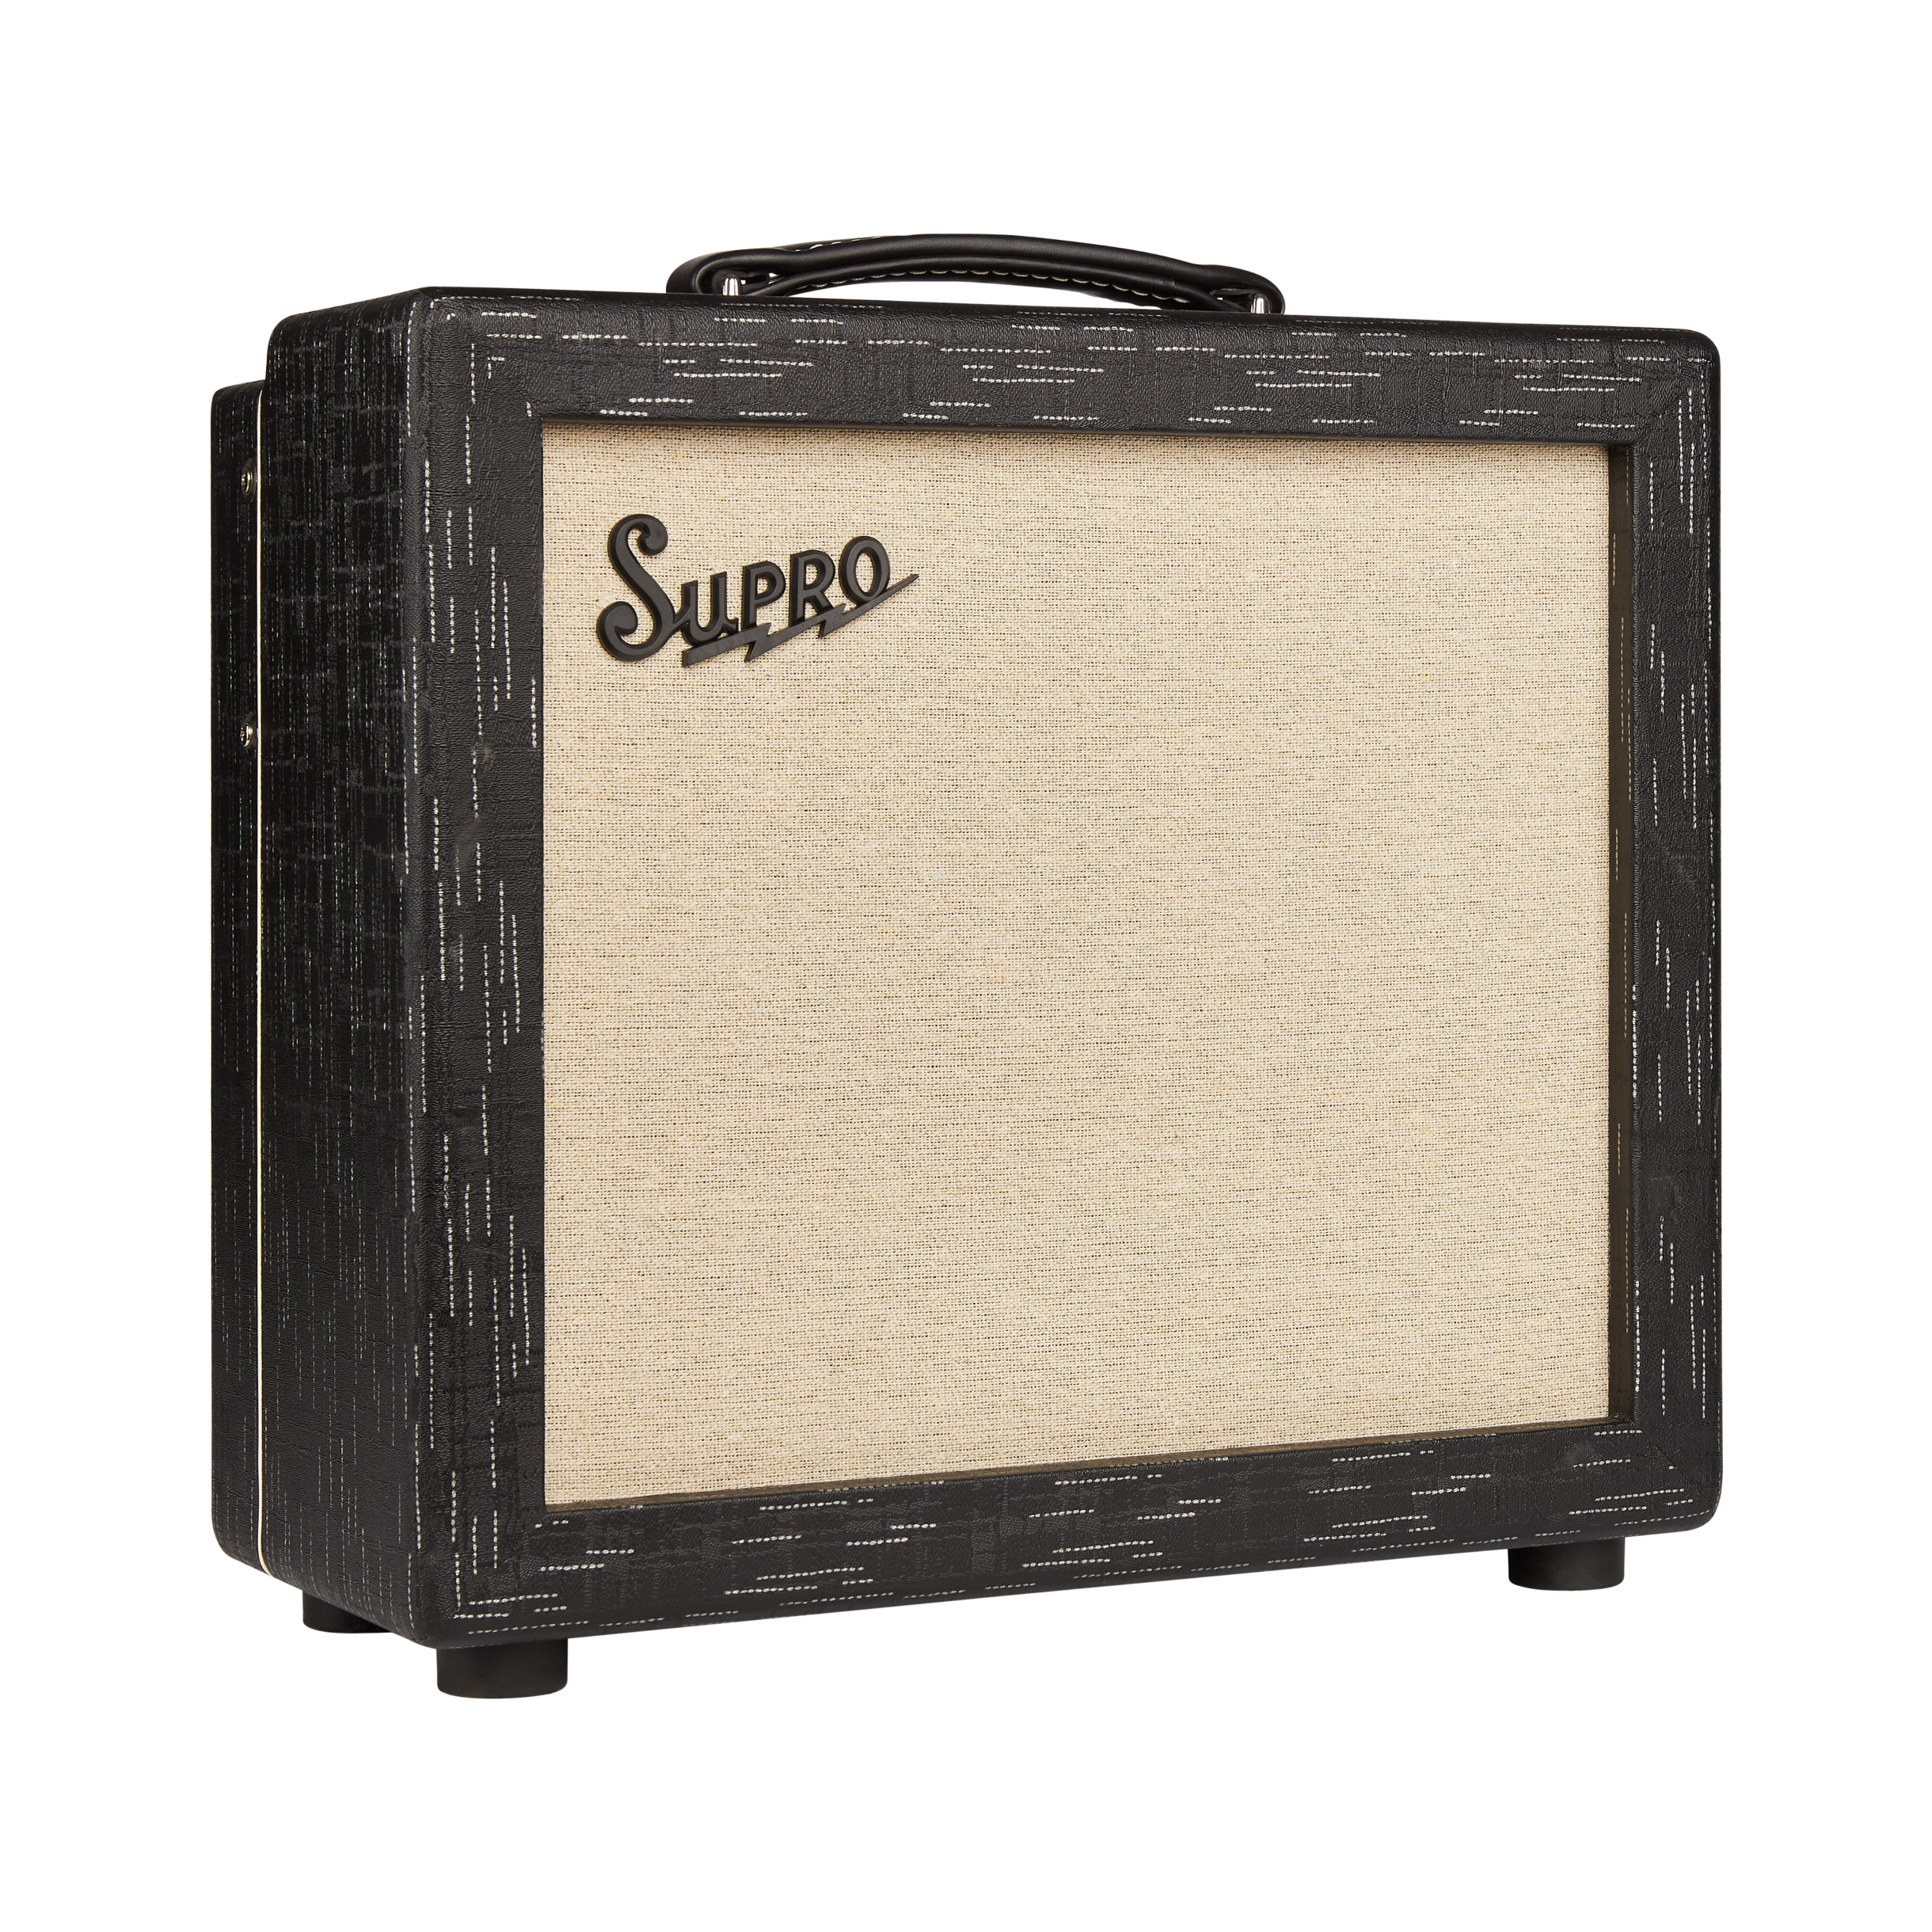 Supro Amulet 15w Combo 1x10 - Electric guitar combo amp - Variation 1